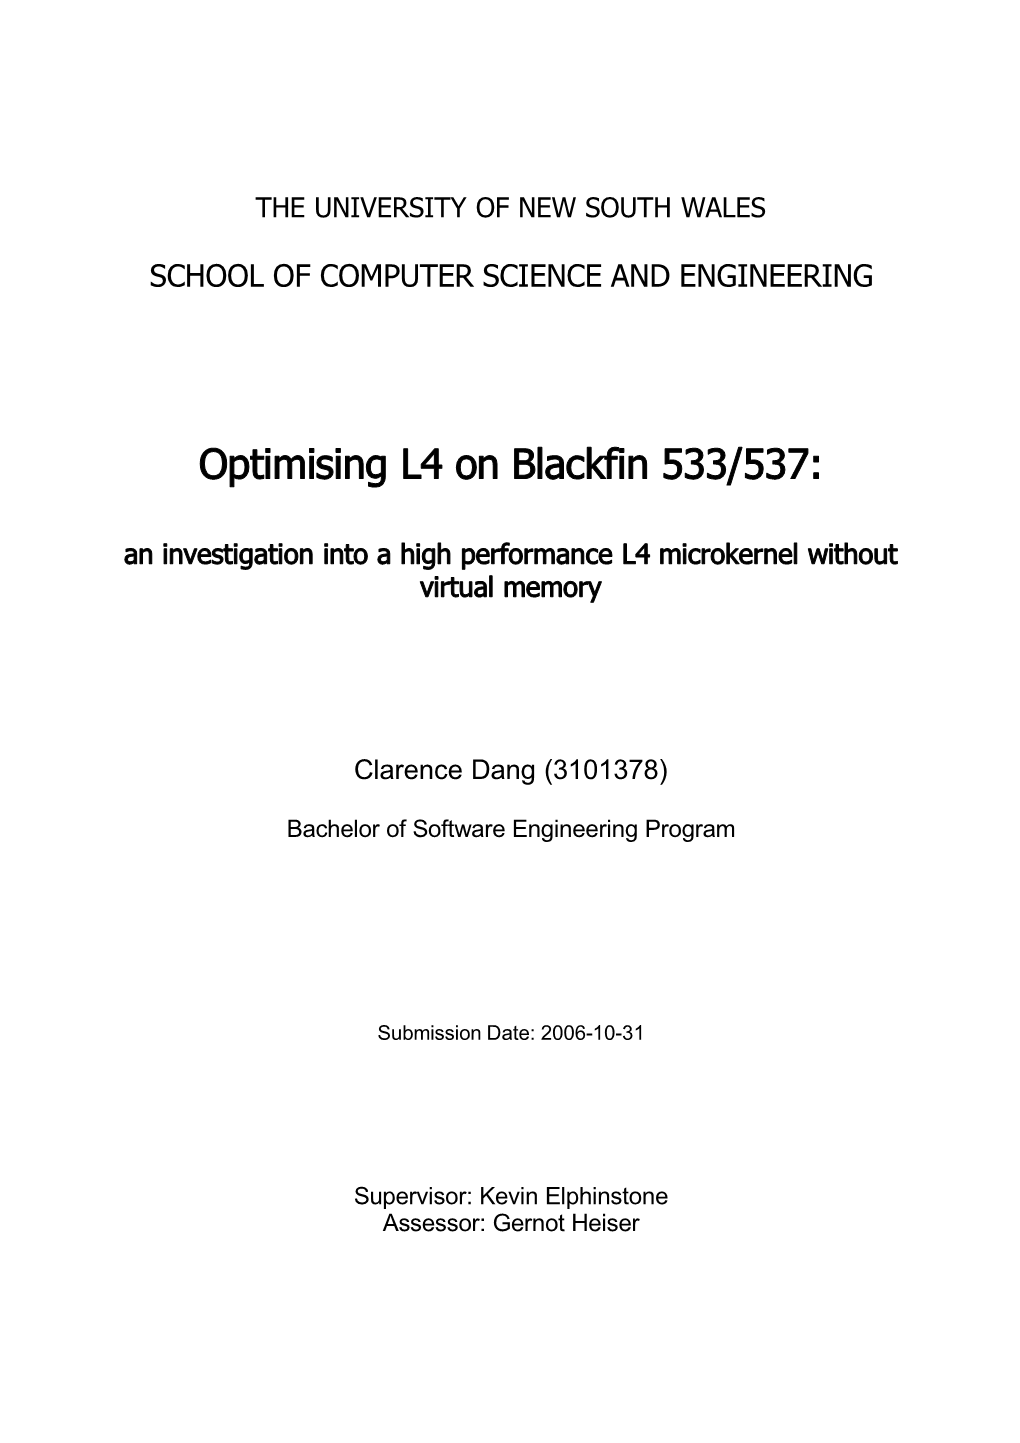 Blackfin 533/537: an Investigation Into a High Performance L4 Microkernel Without Virtual Memory